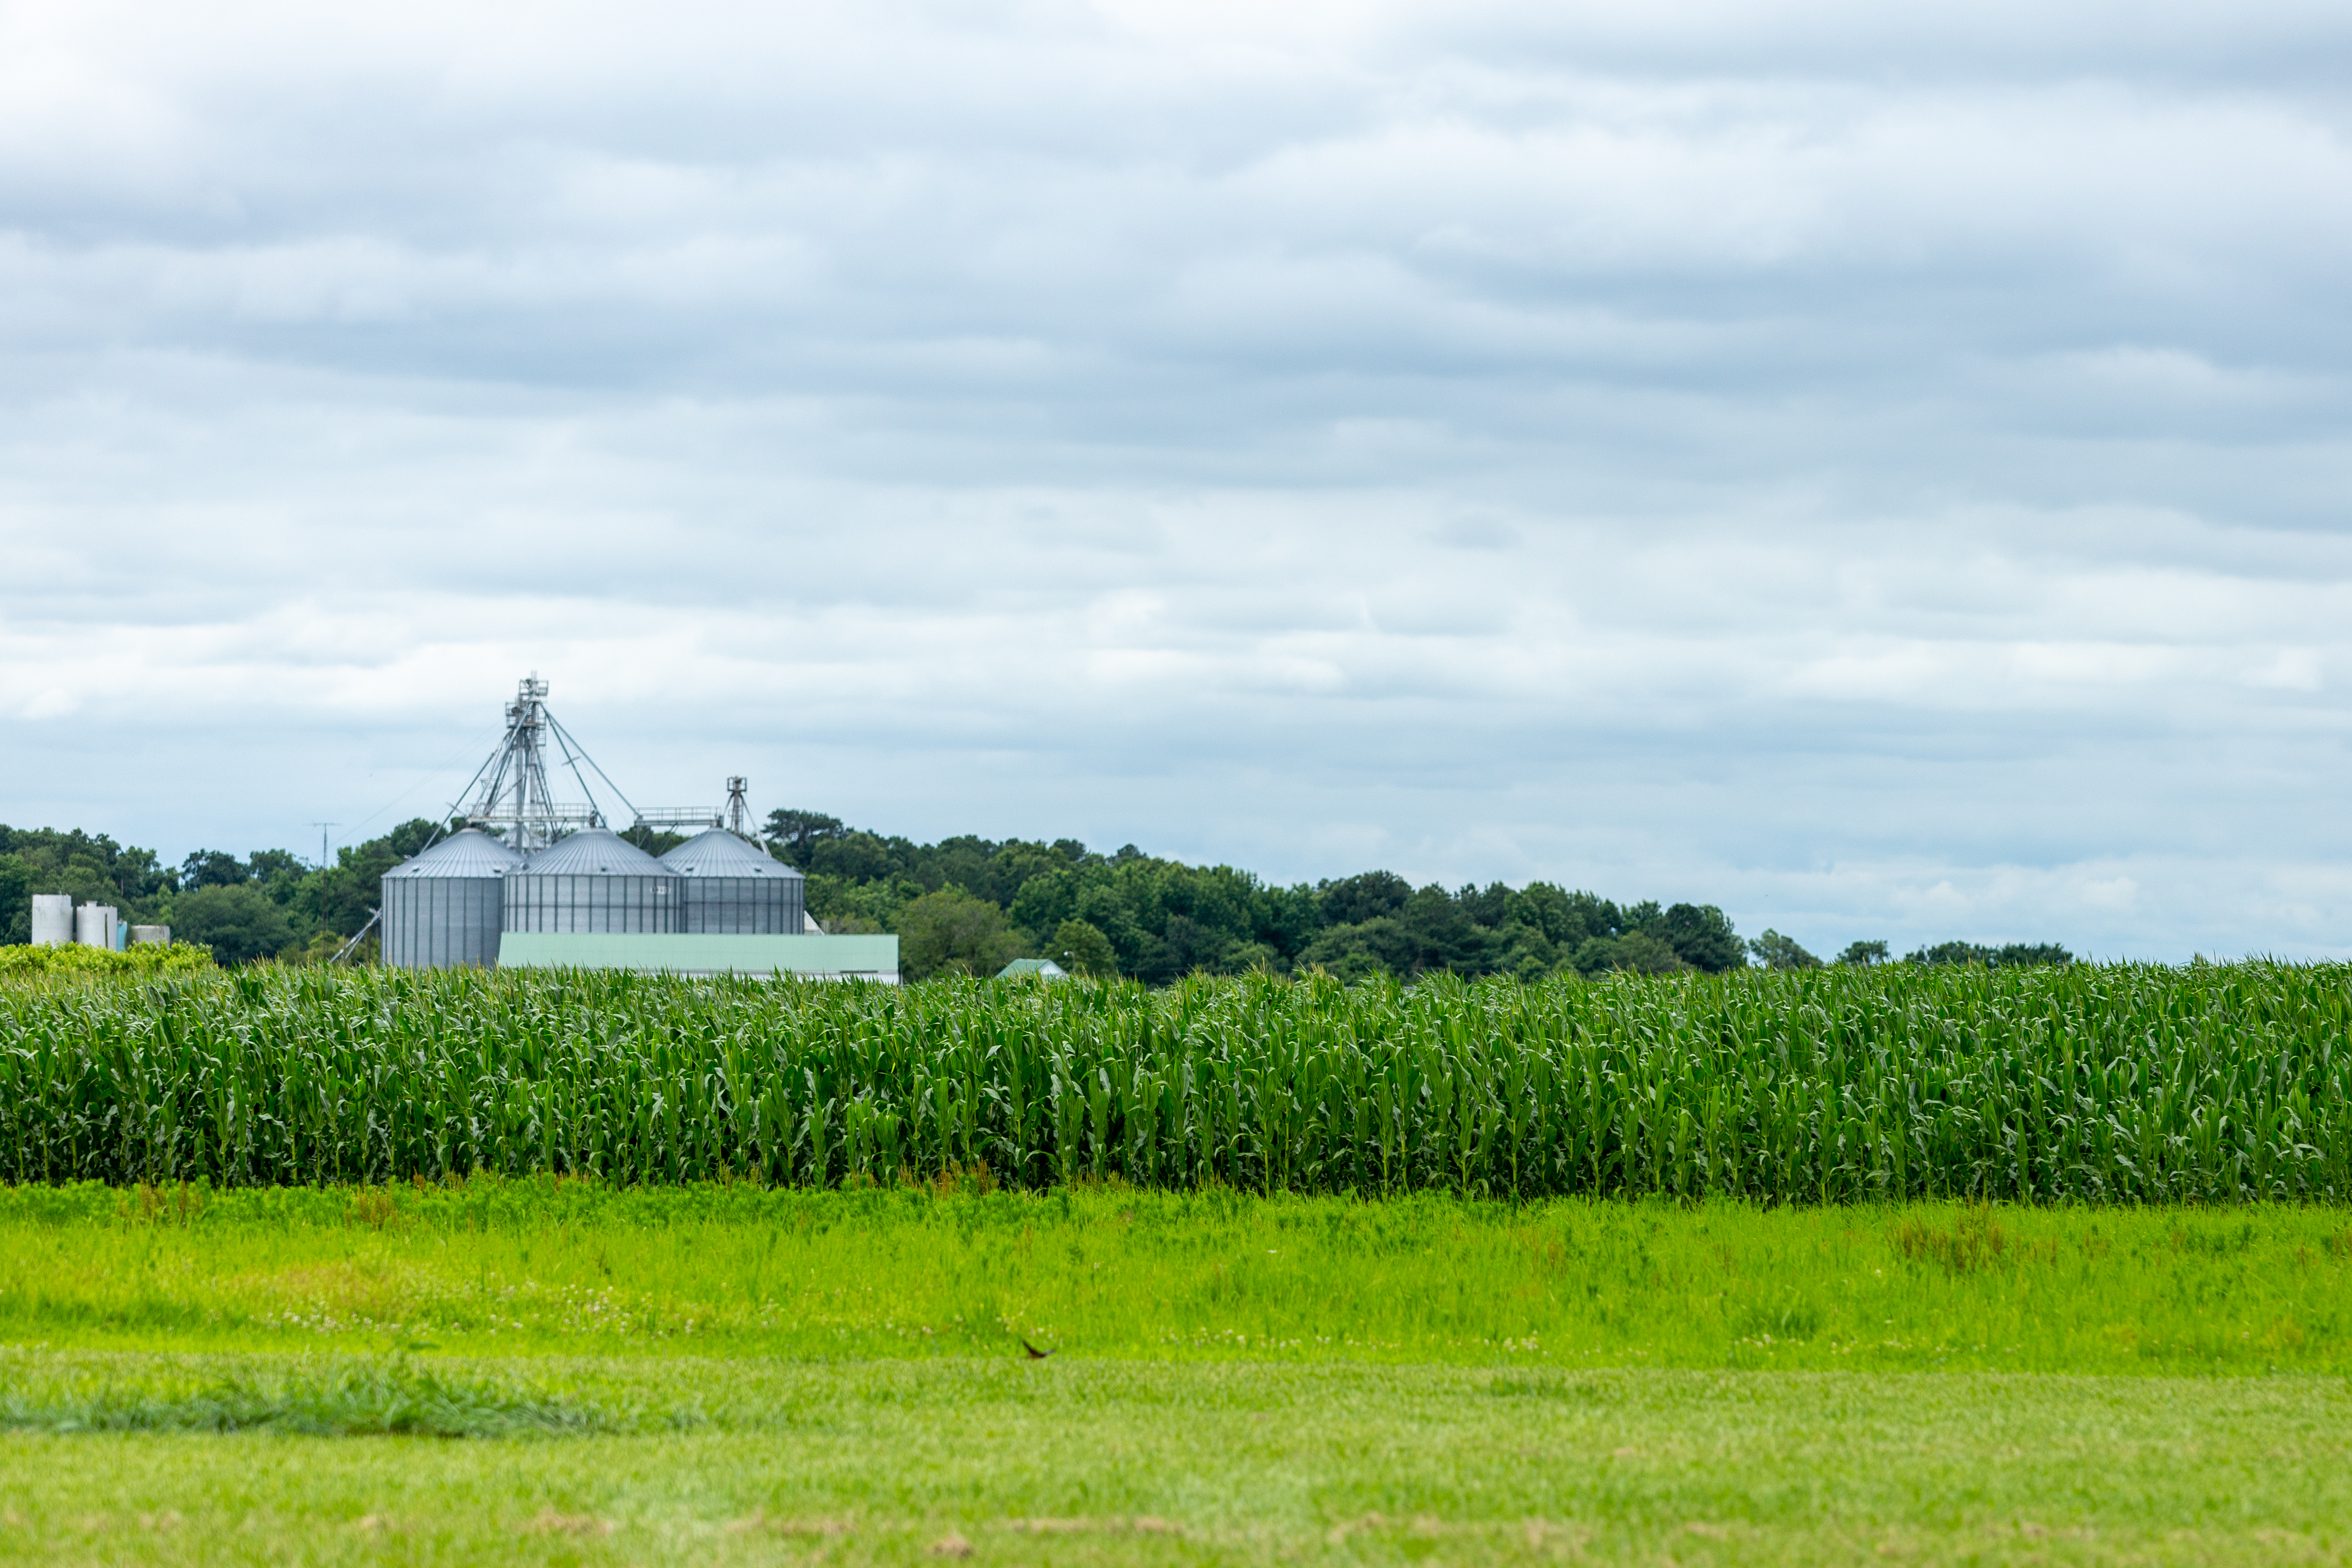 Landscape of corn field with grain bins in the background